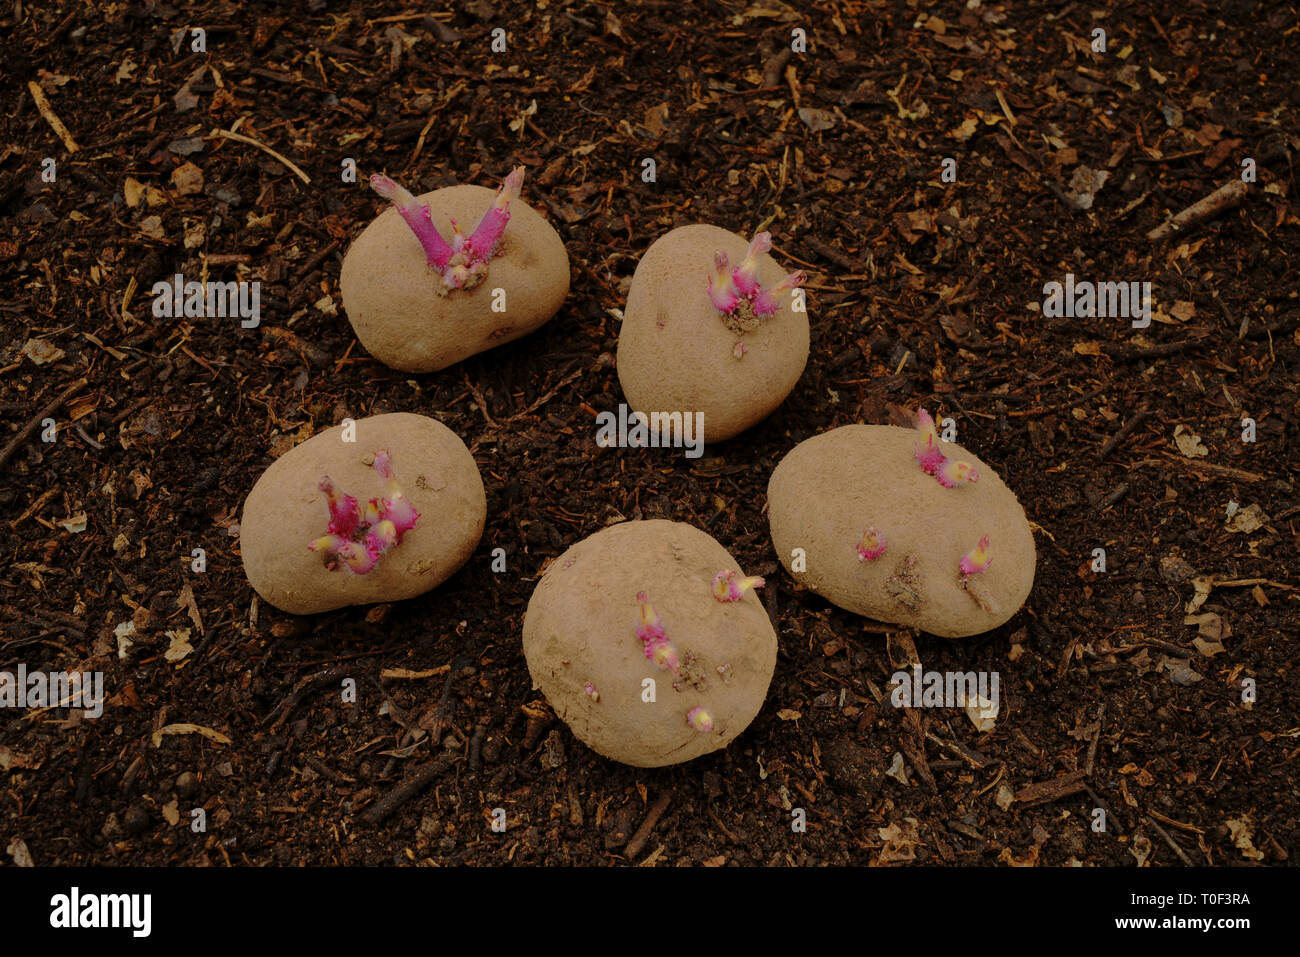 Red Duke of York seed potatoes chitted ready for planting. Stock Photo